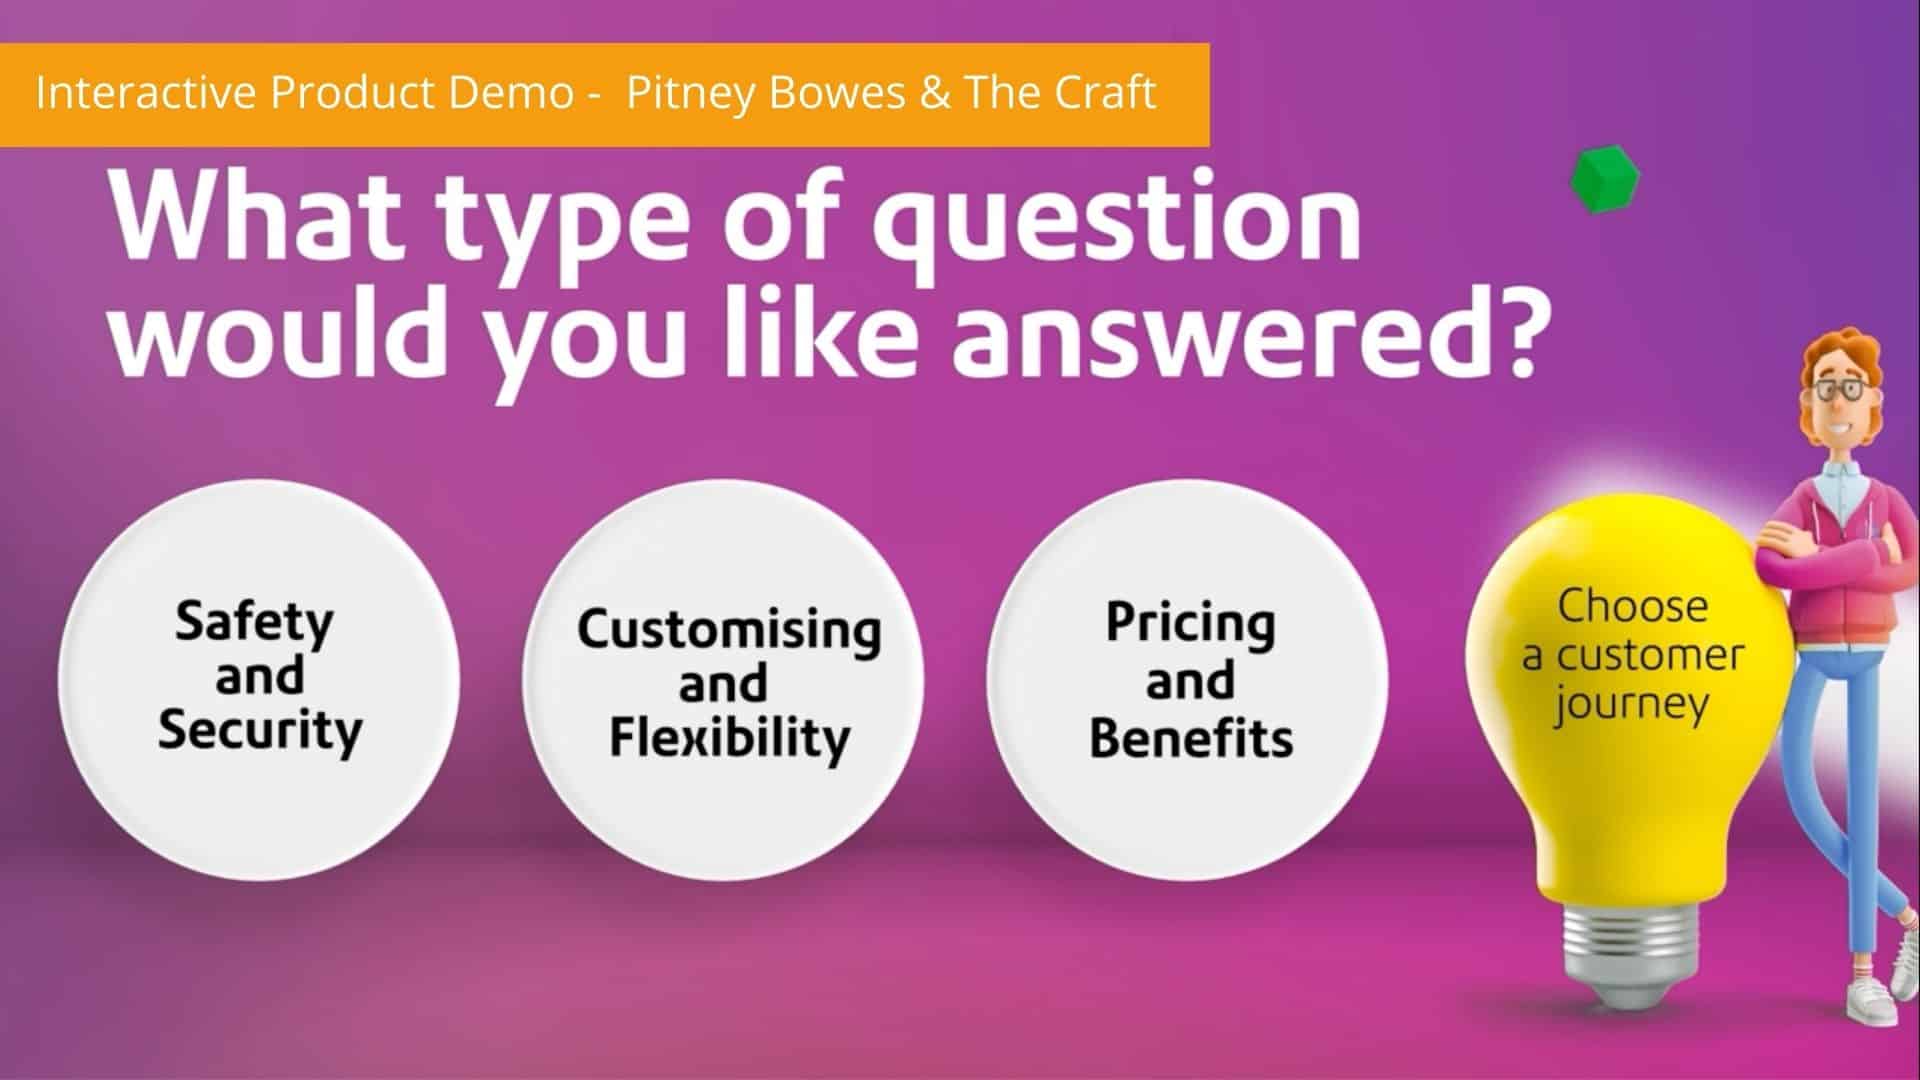 Interactive Product Demo Video - an animation freeze-frame. A cartoon man stands on the right side of the frame leaning on a lightbulb. Four options are presented to the viewer on screen in white circles - "What type of question would you like answered?" "Safety and security" "customising and flexibility" "pricing and benefits" "choose a customer journey"